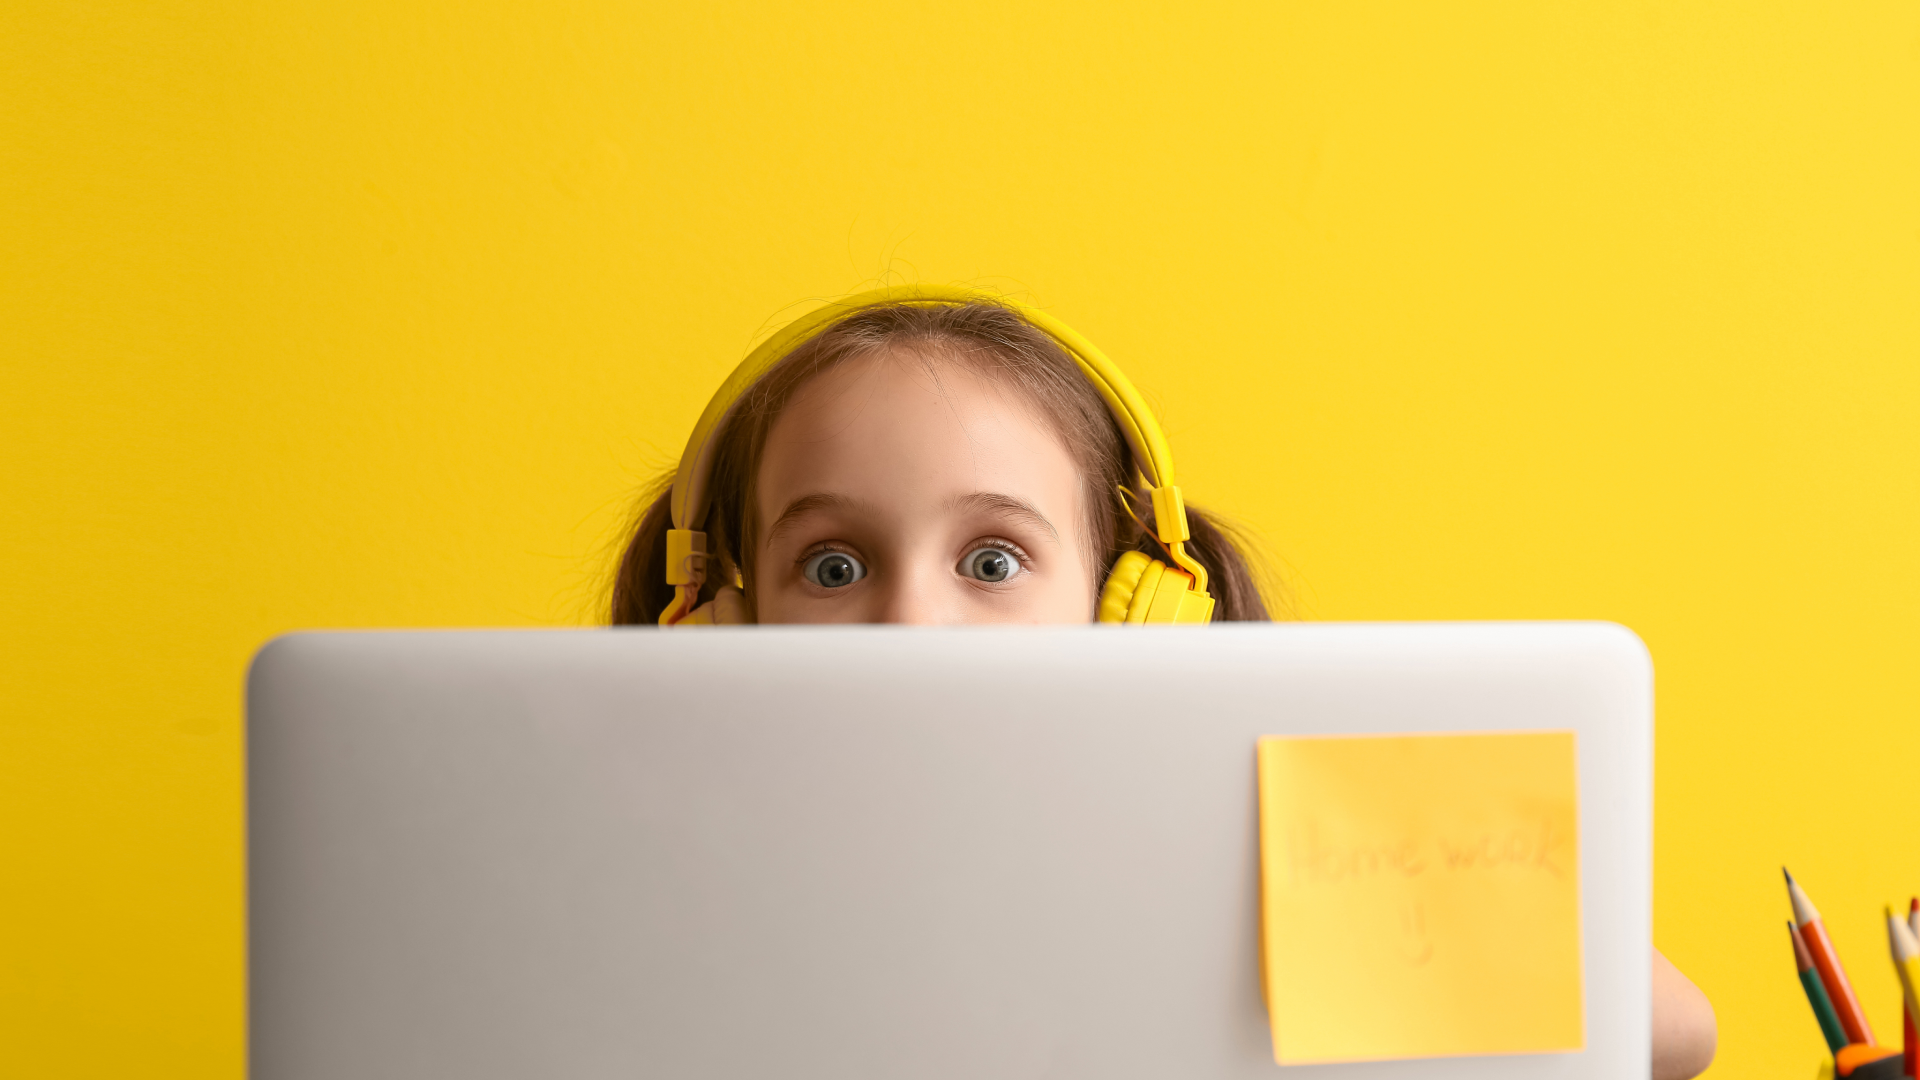 Tips and Tools to Block Inappropriate Content for Children Online